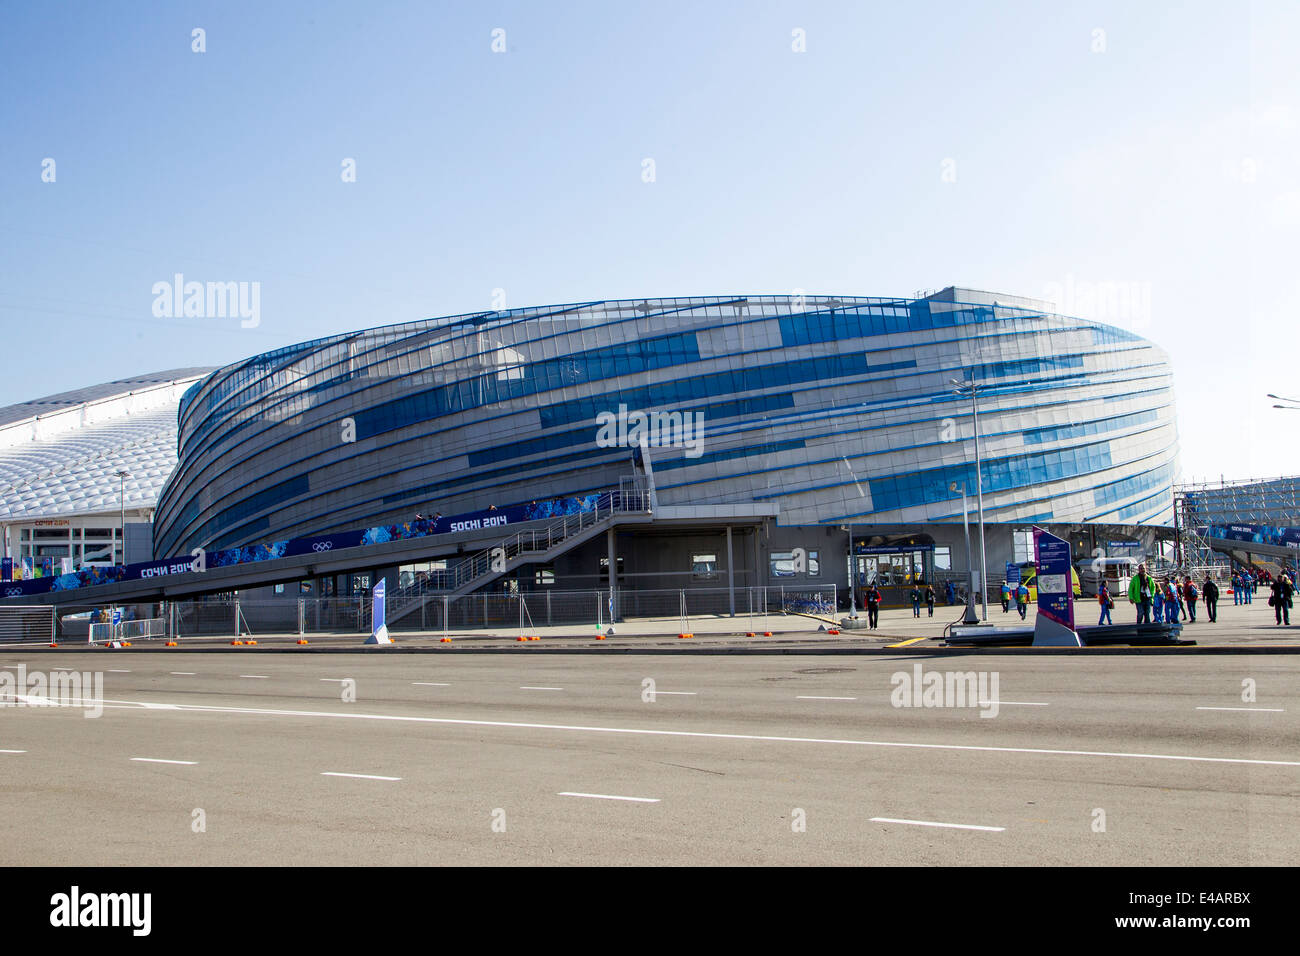 Shayba Arena venue for Women's Ice Hockey-USA-FIN at the Olympic Winter Games, Sochi 2014 Stock Photo